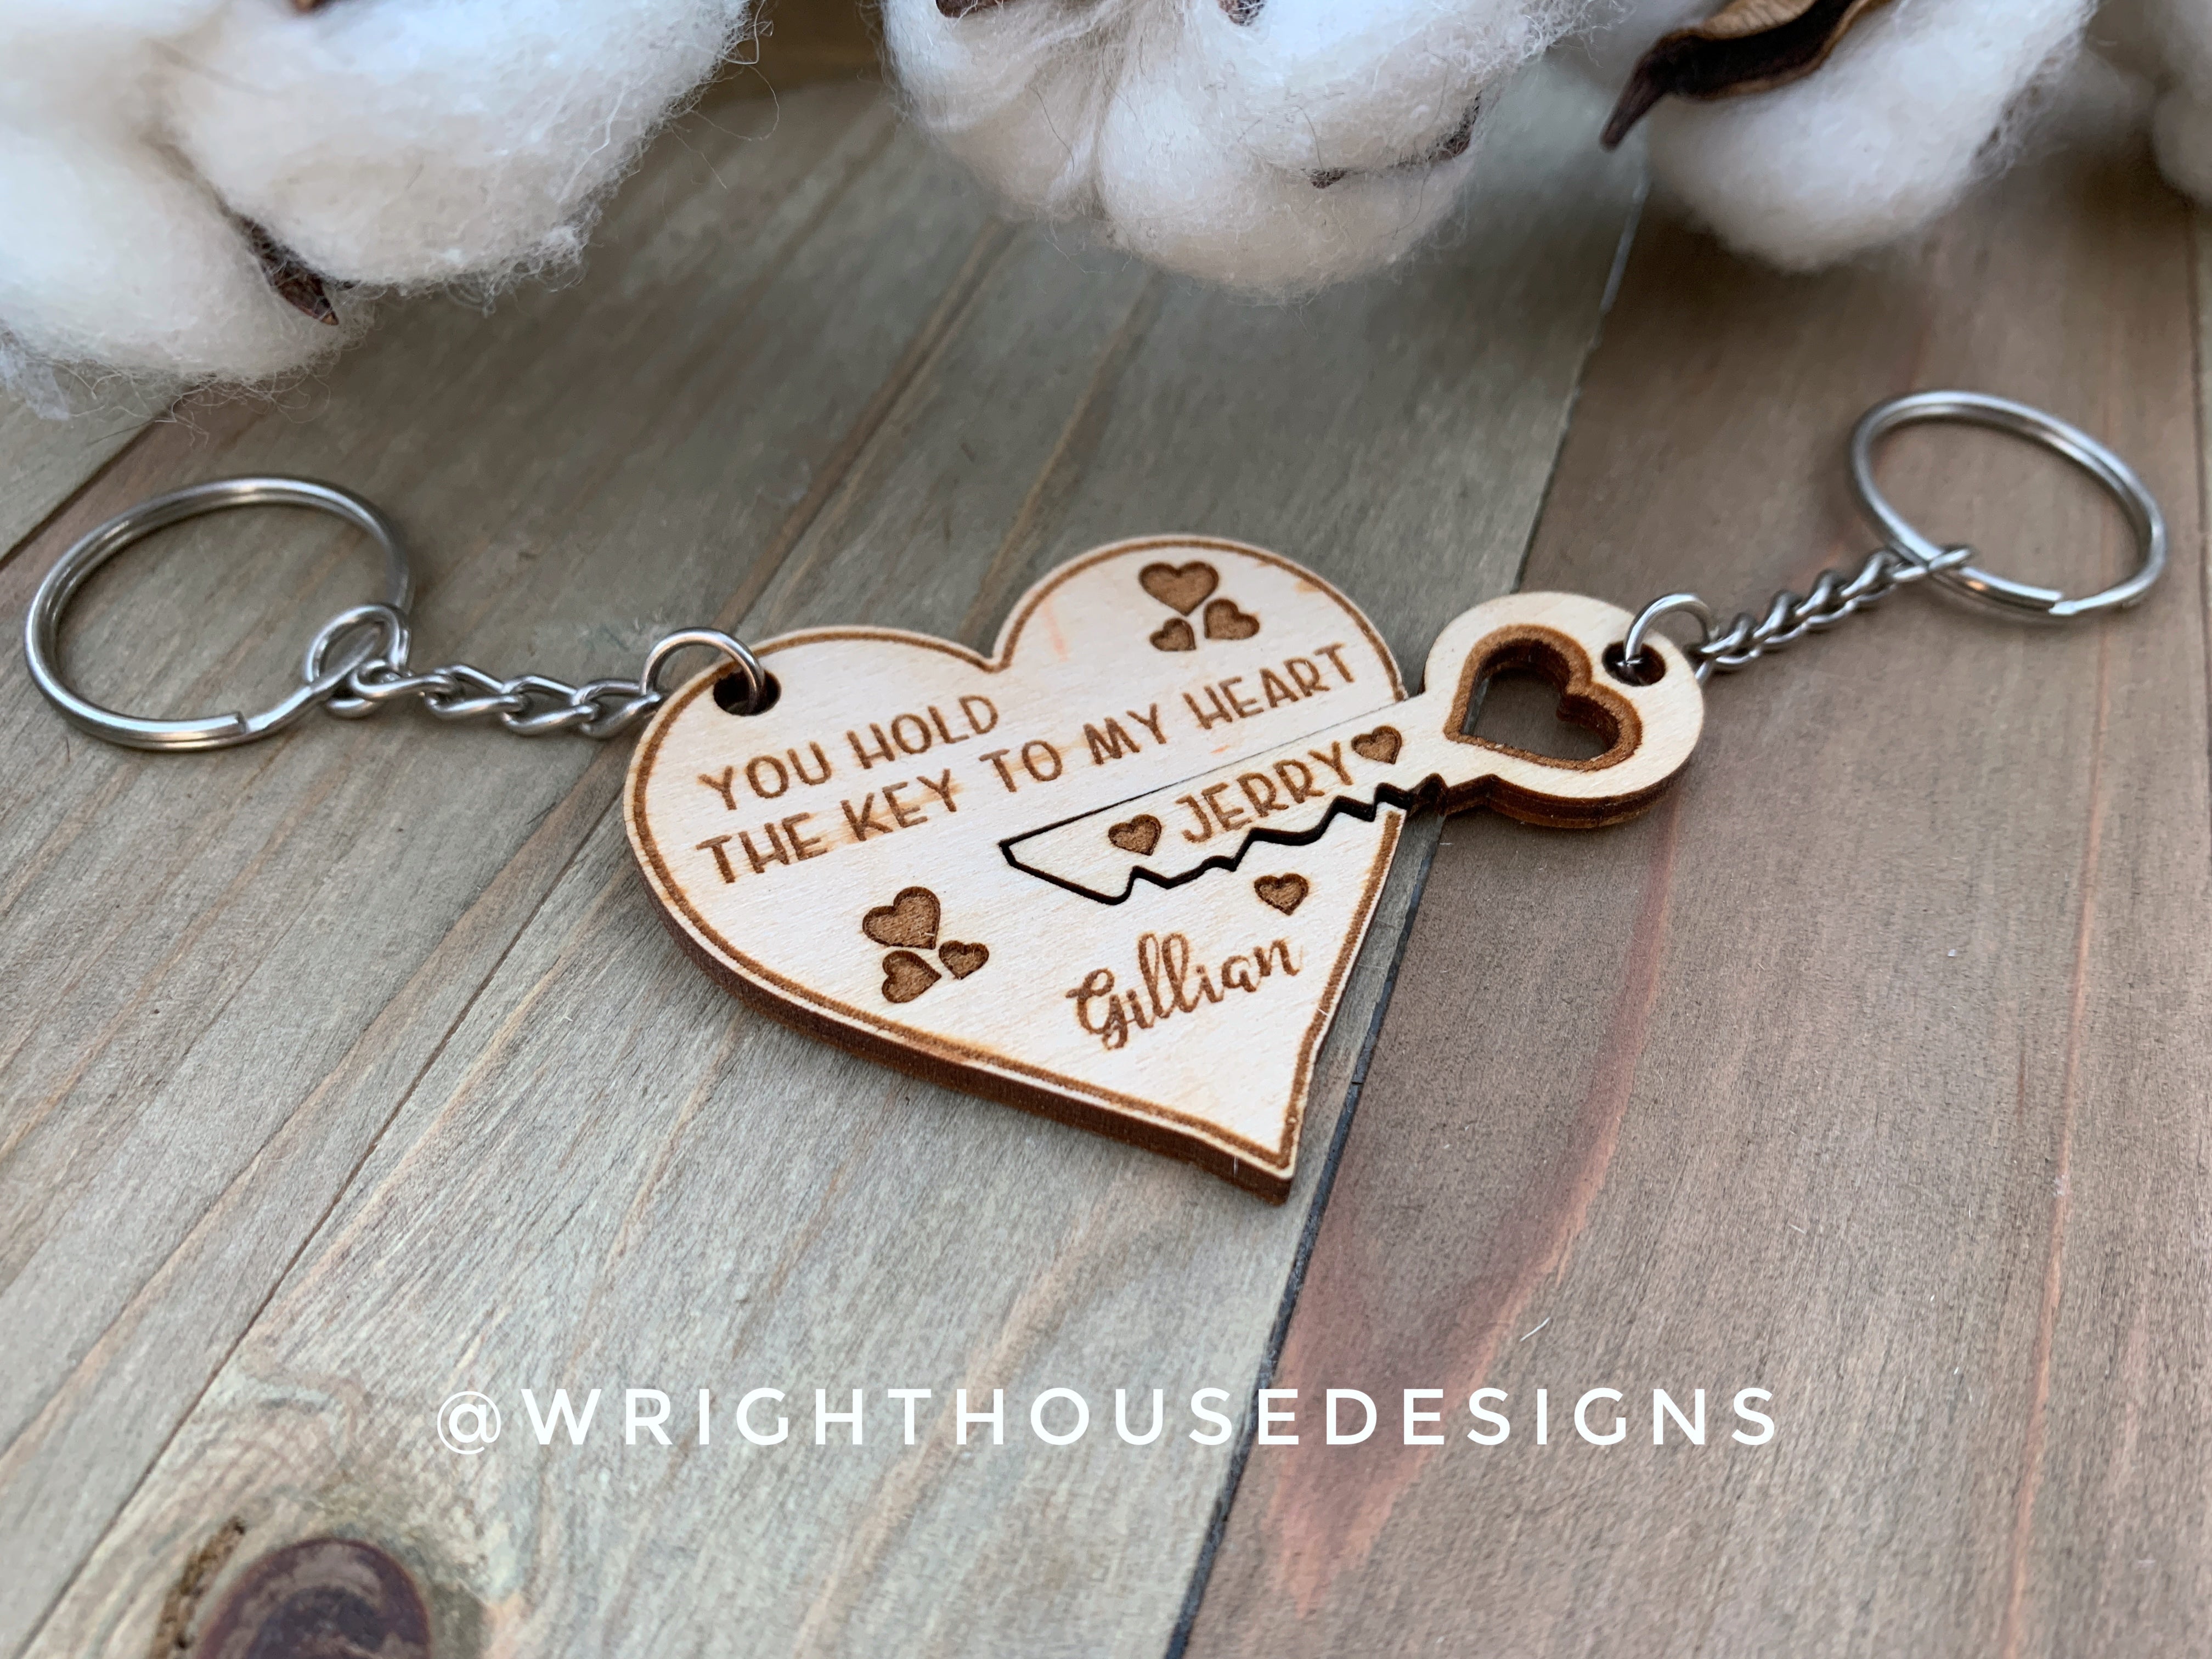 Personalized Valentine's Heart & Key Duo Wooden Keychains